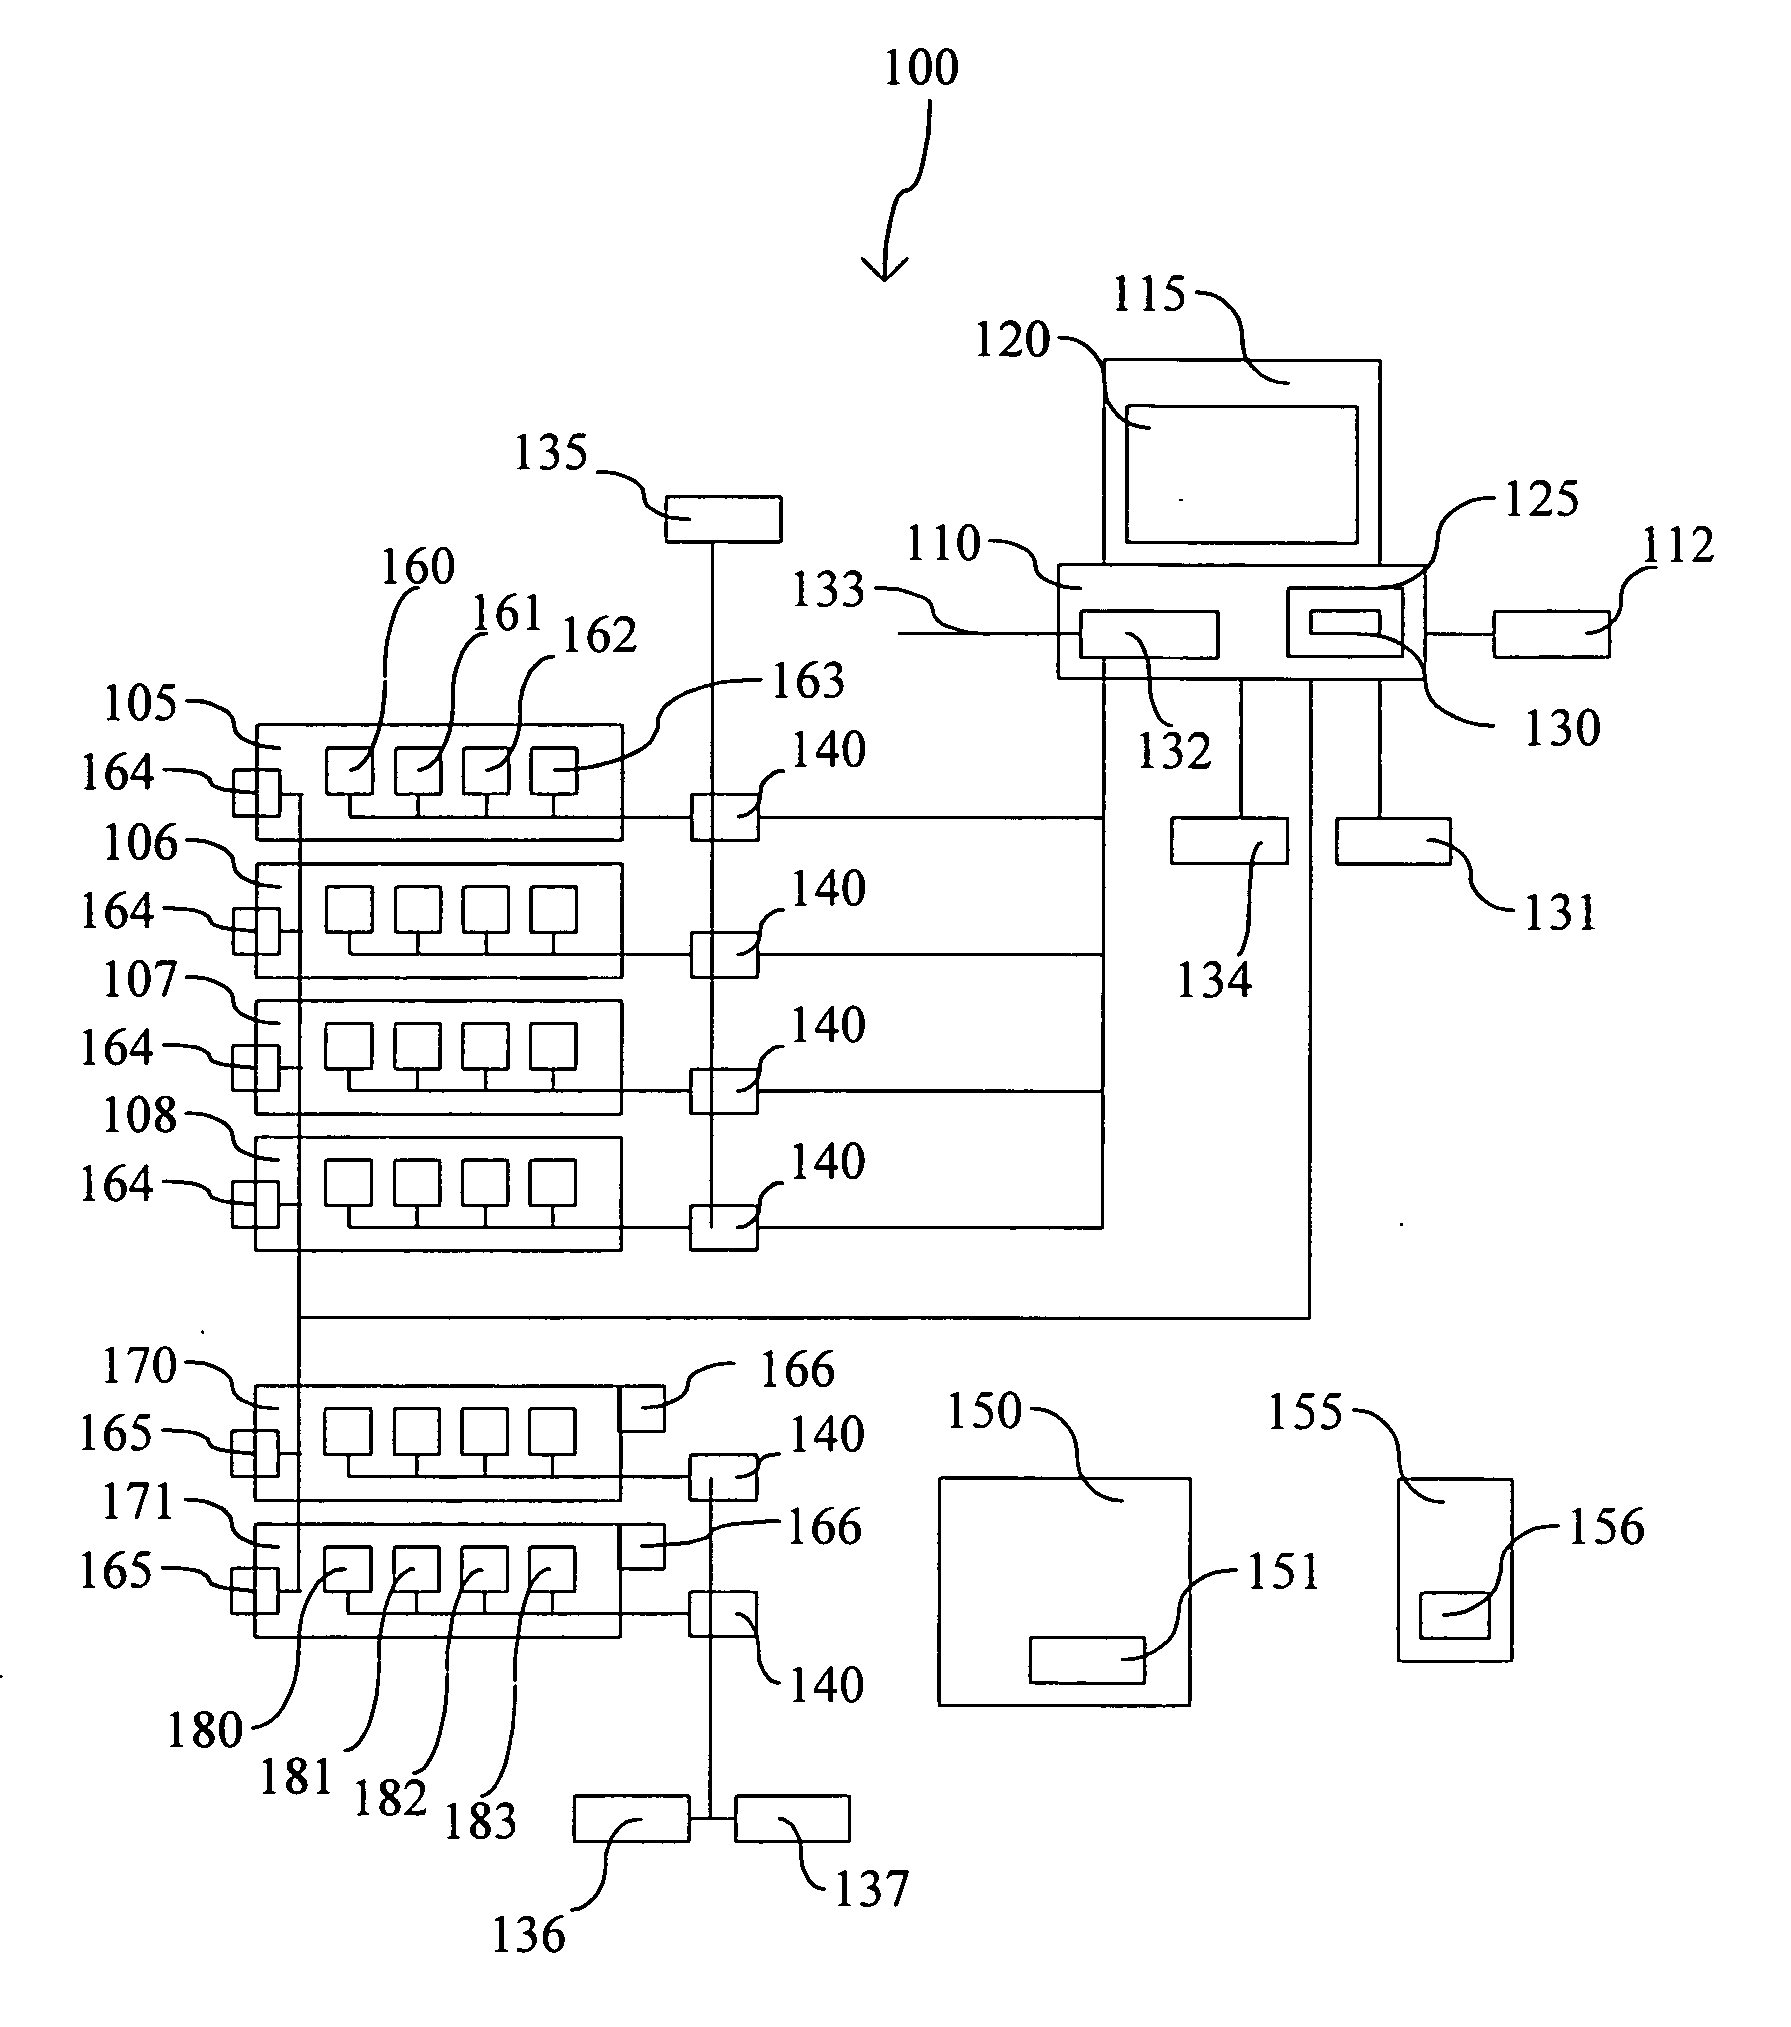 Process and device for recharging portable electronic devices